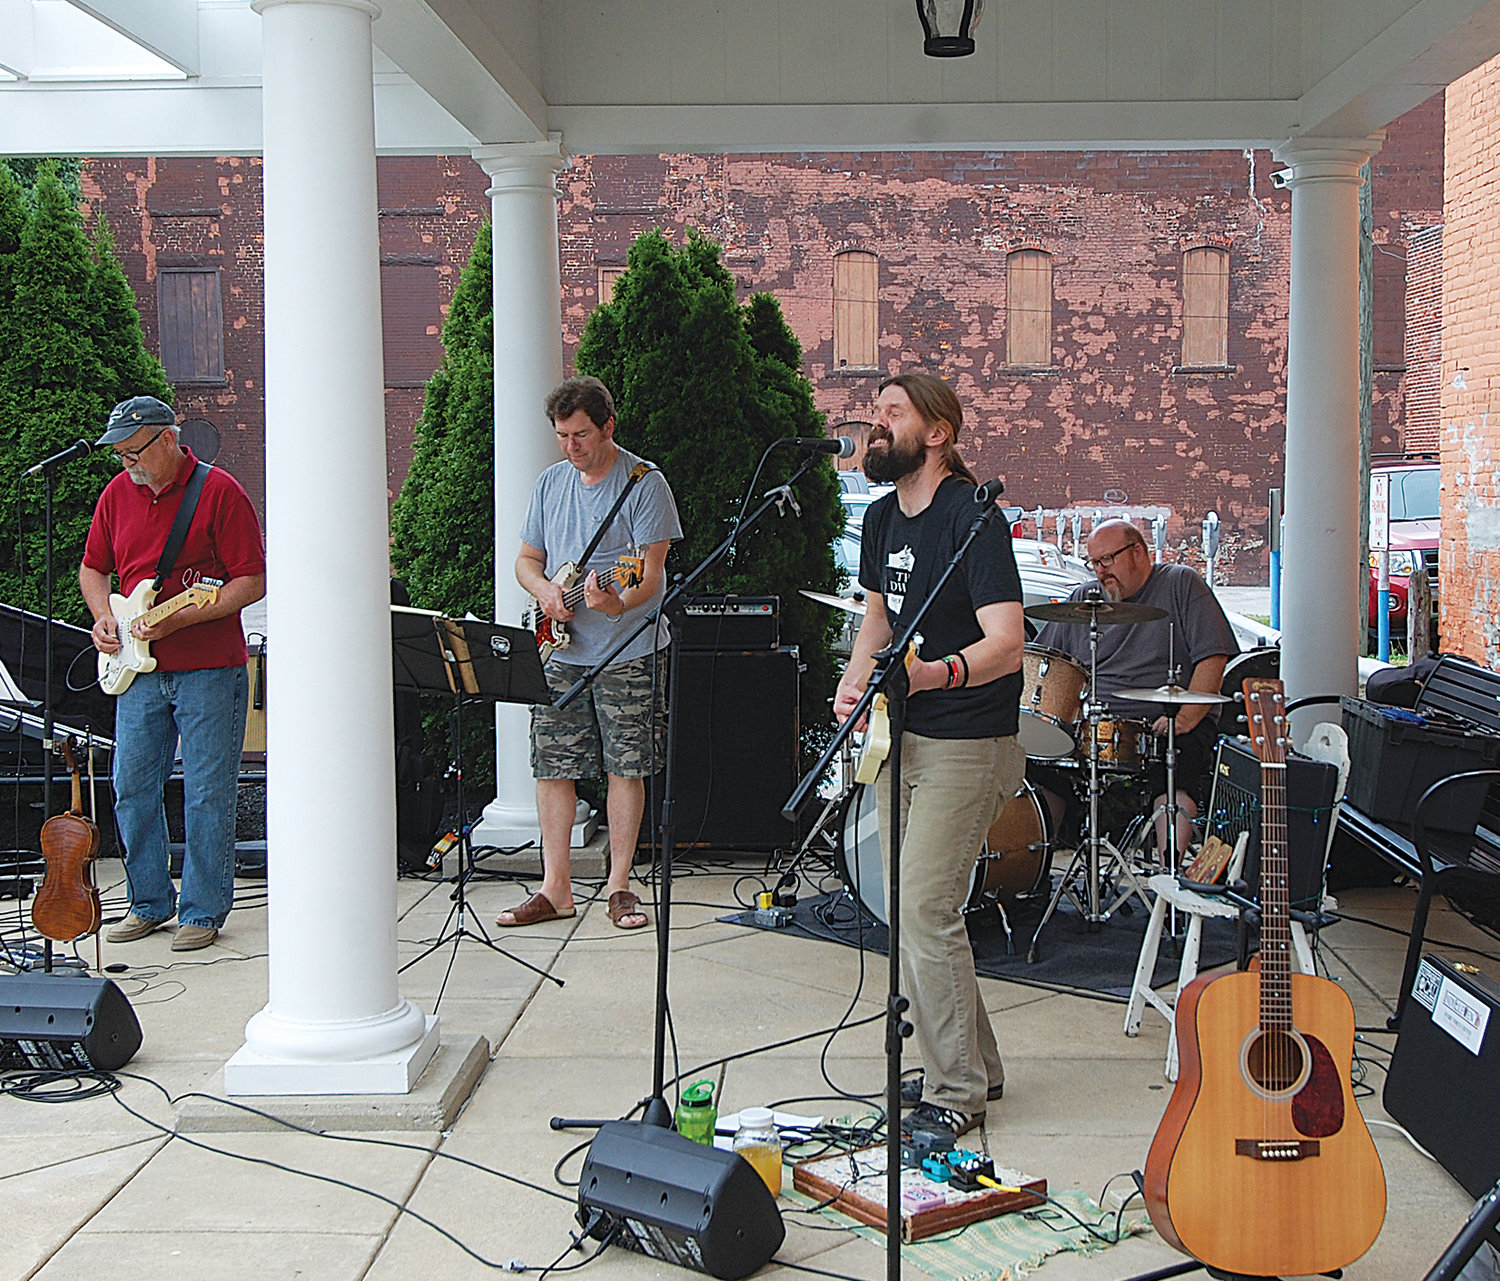 Joel Weir, center, performs with his band John the Silent at Marie Canine Plaza during the First Friday concert series in 2016. A collection of Weir’s music has been released by an independent British record label.